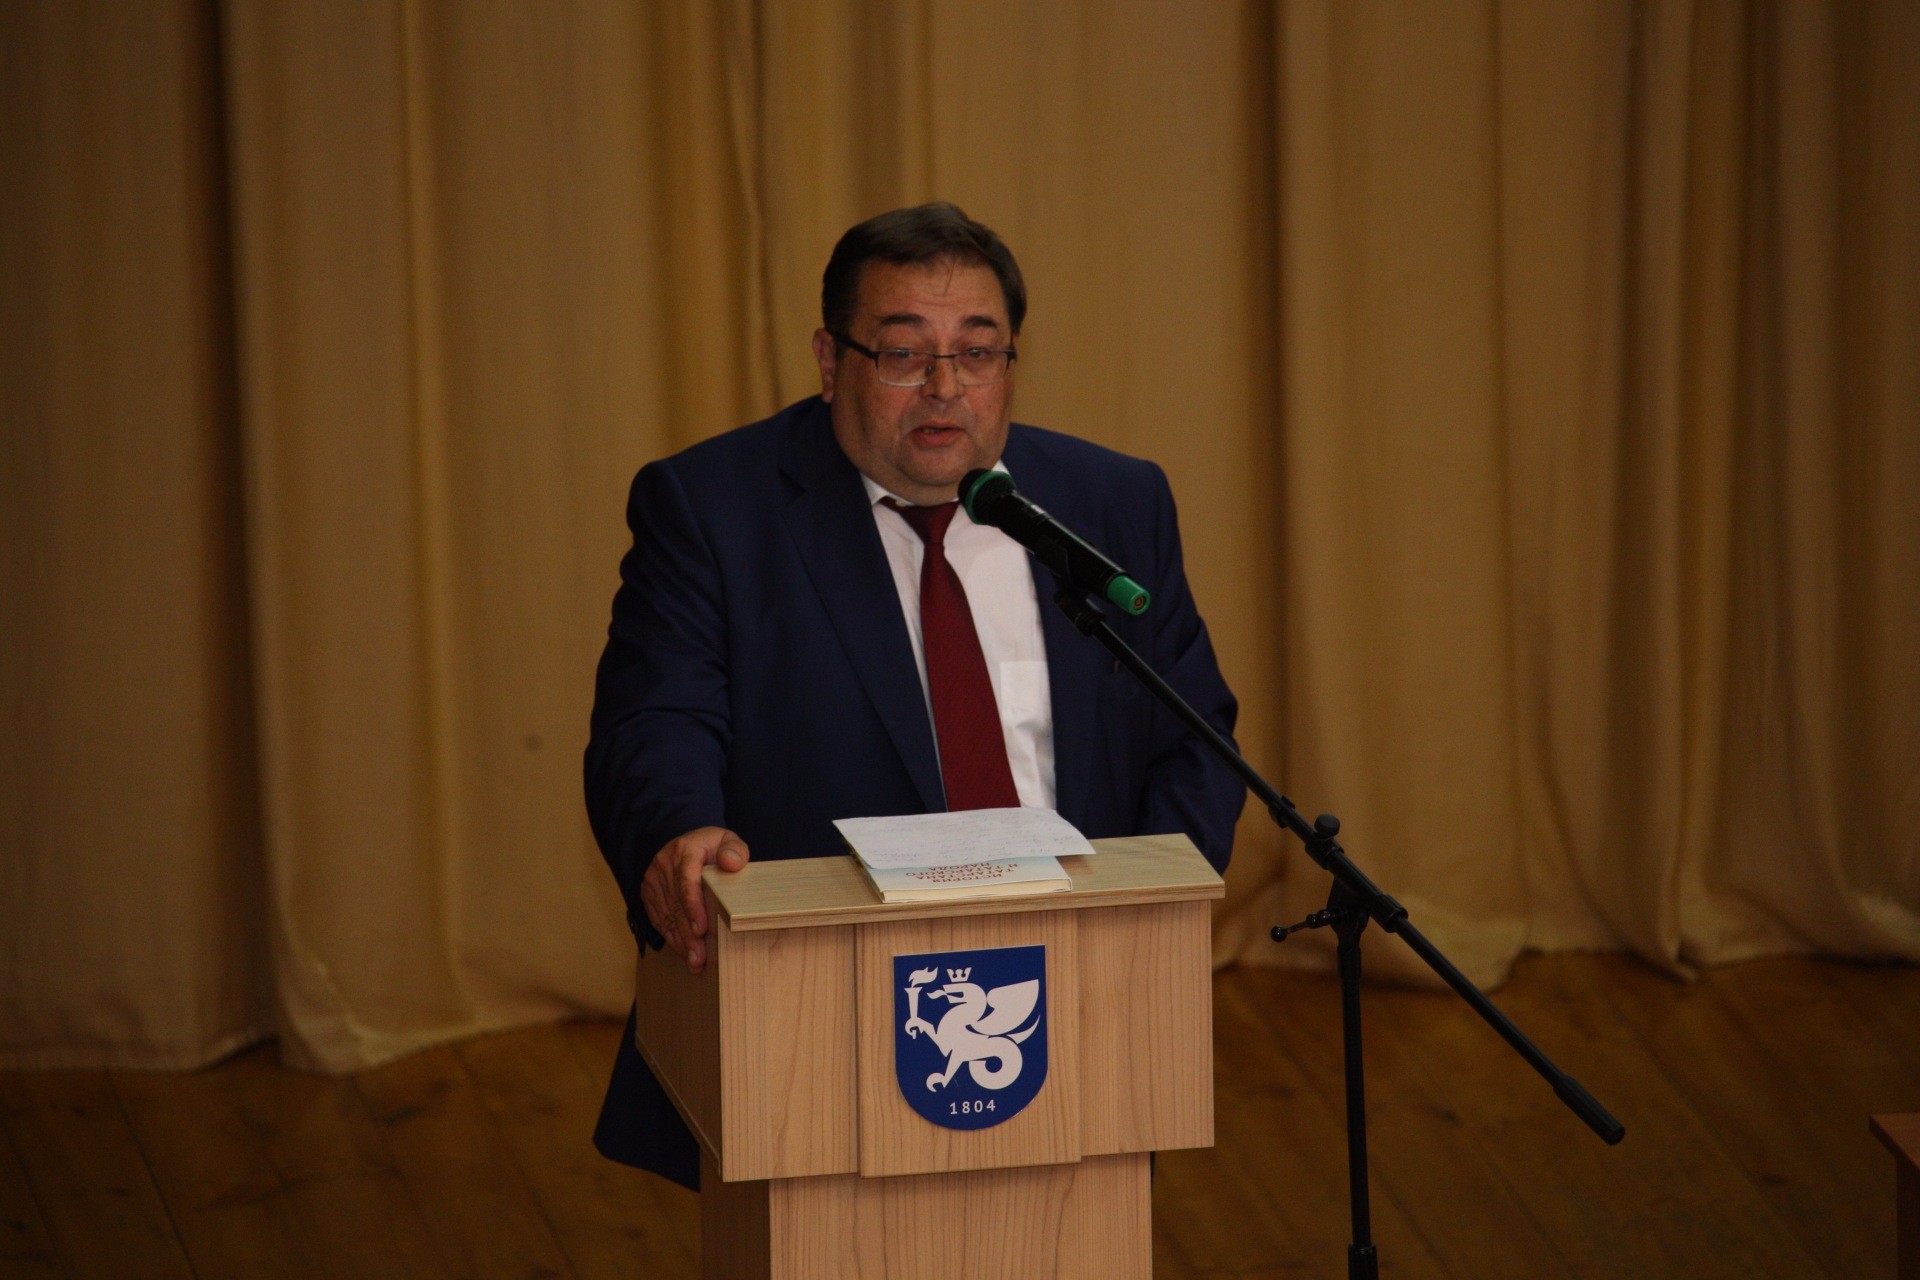 A plenary session of the I Congress of Teachers of History and Social Studies of the Republic of Tatarstan was held in Elabuga Institute of KFU ,Elabuga Institute